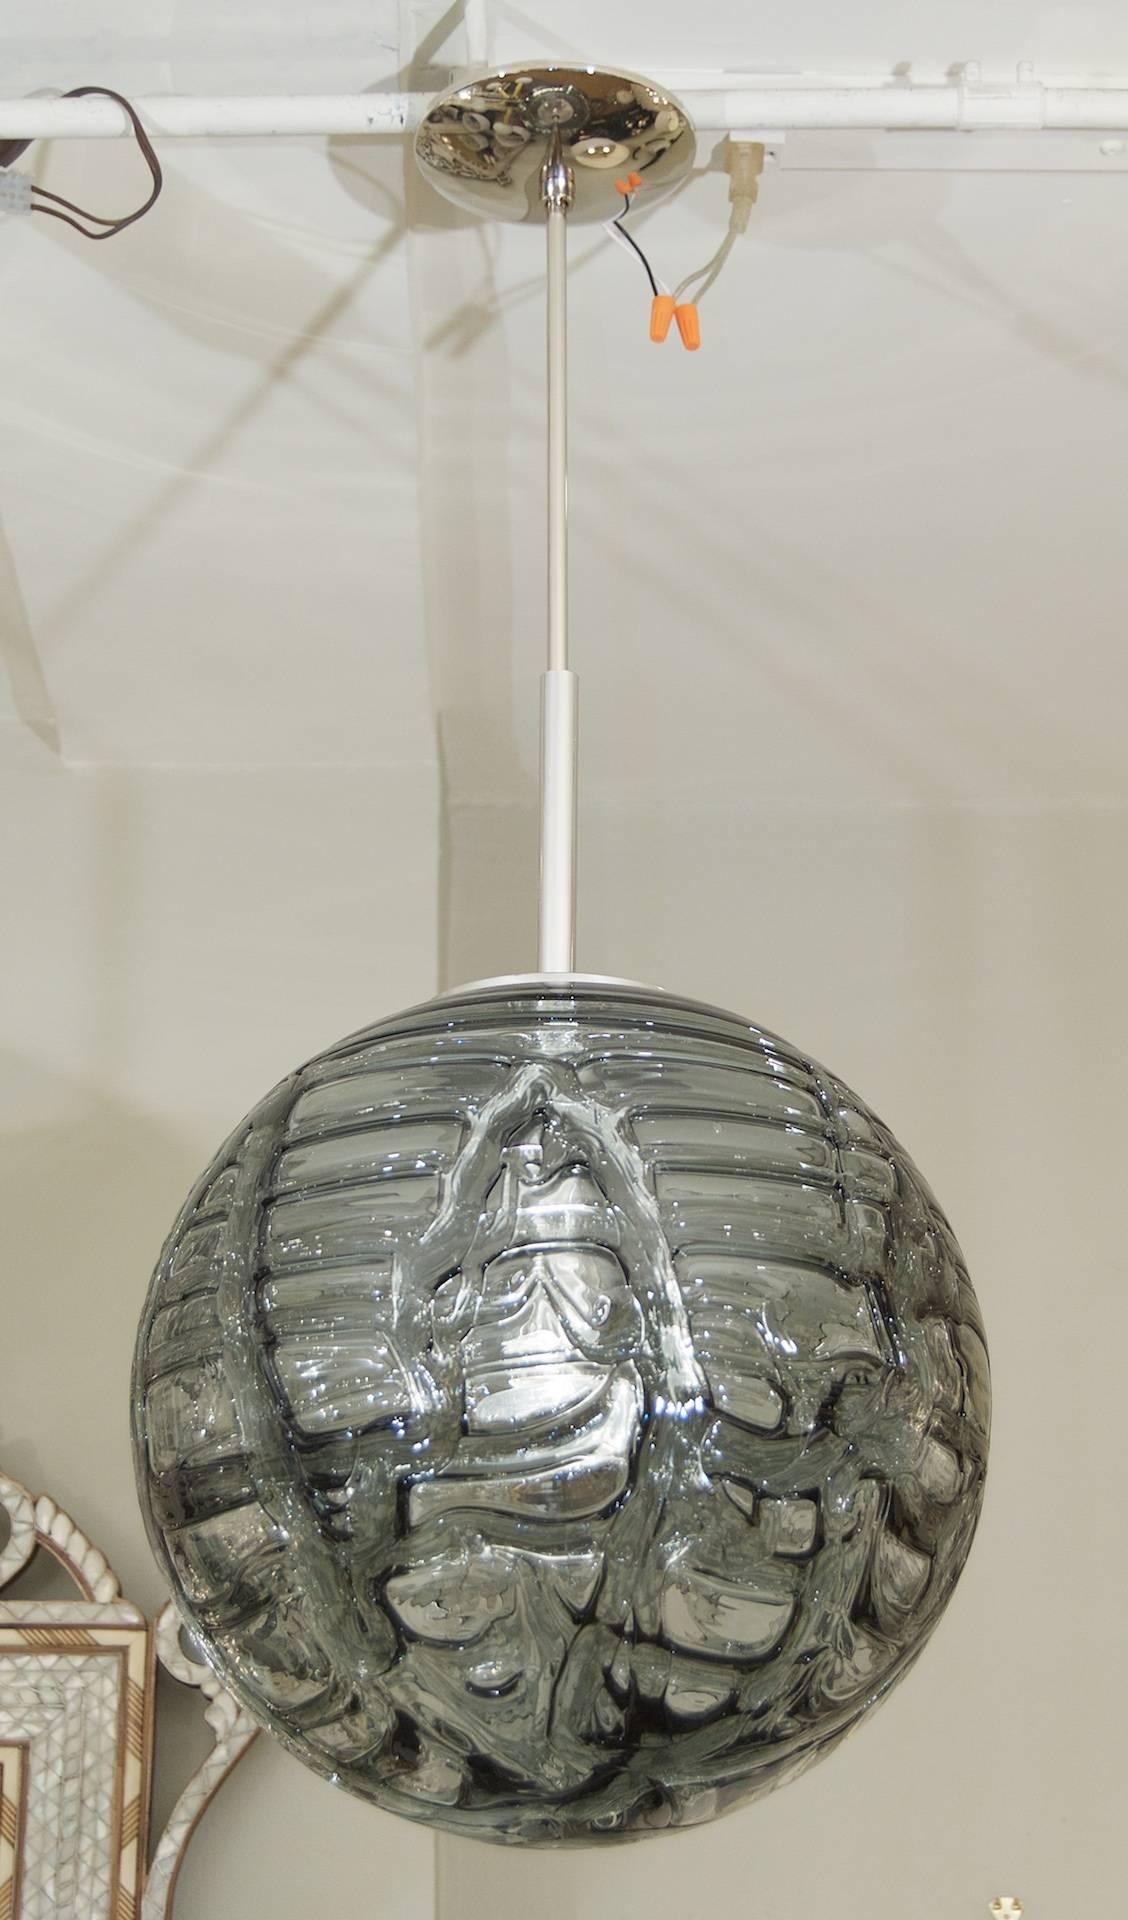 Fantastic Doria pendant will complement all decors. Heavy textured wave surface glass, smoke tones variegated from clear.

Chrome hardware.

Takes a single medium base bulb up to 100 watts, new wiring. Length of drop rod can be adjusted. Height